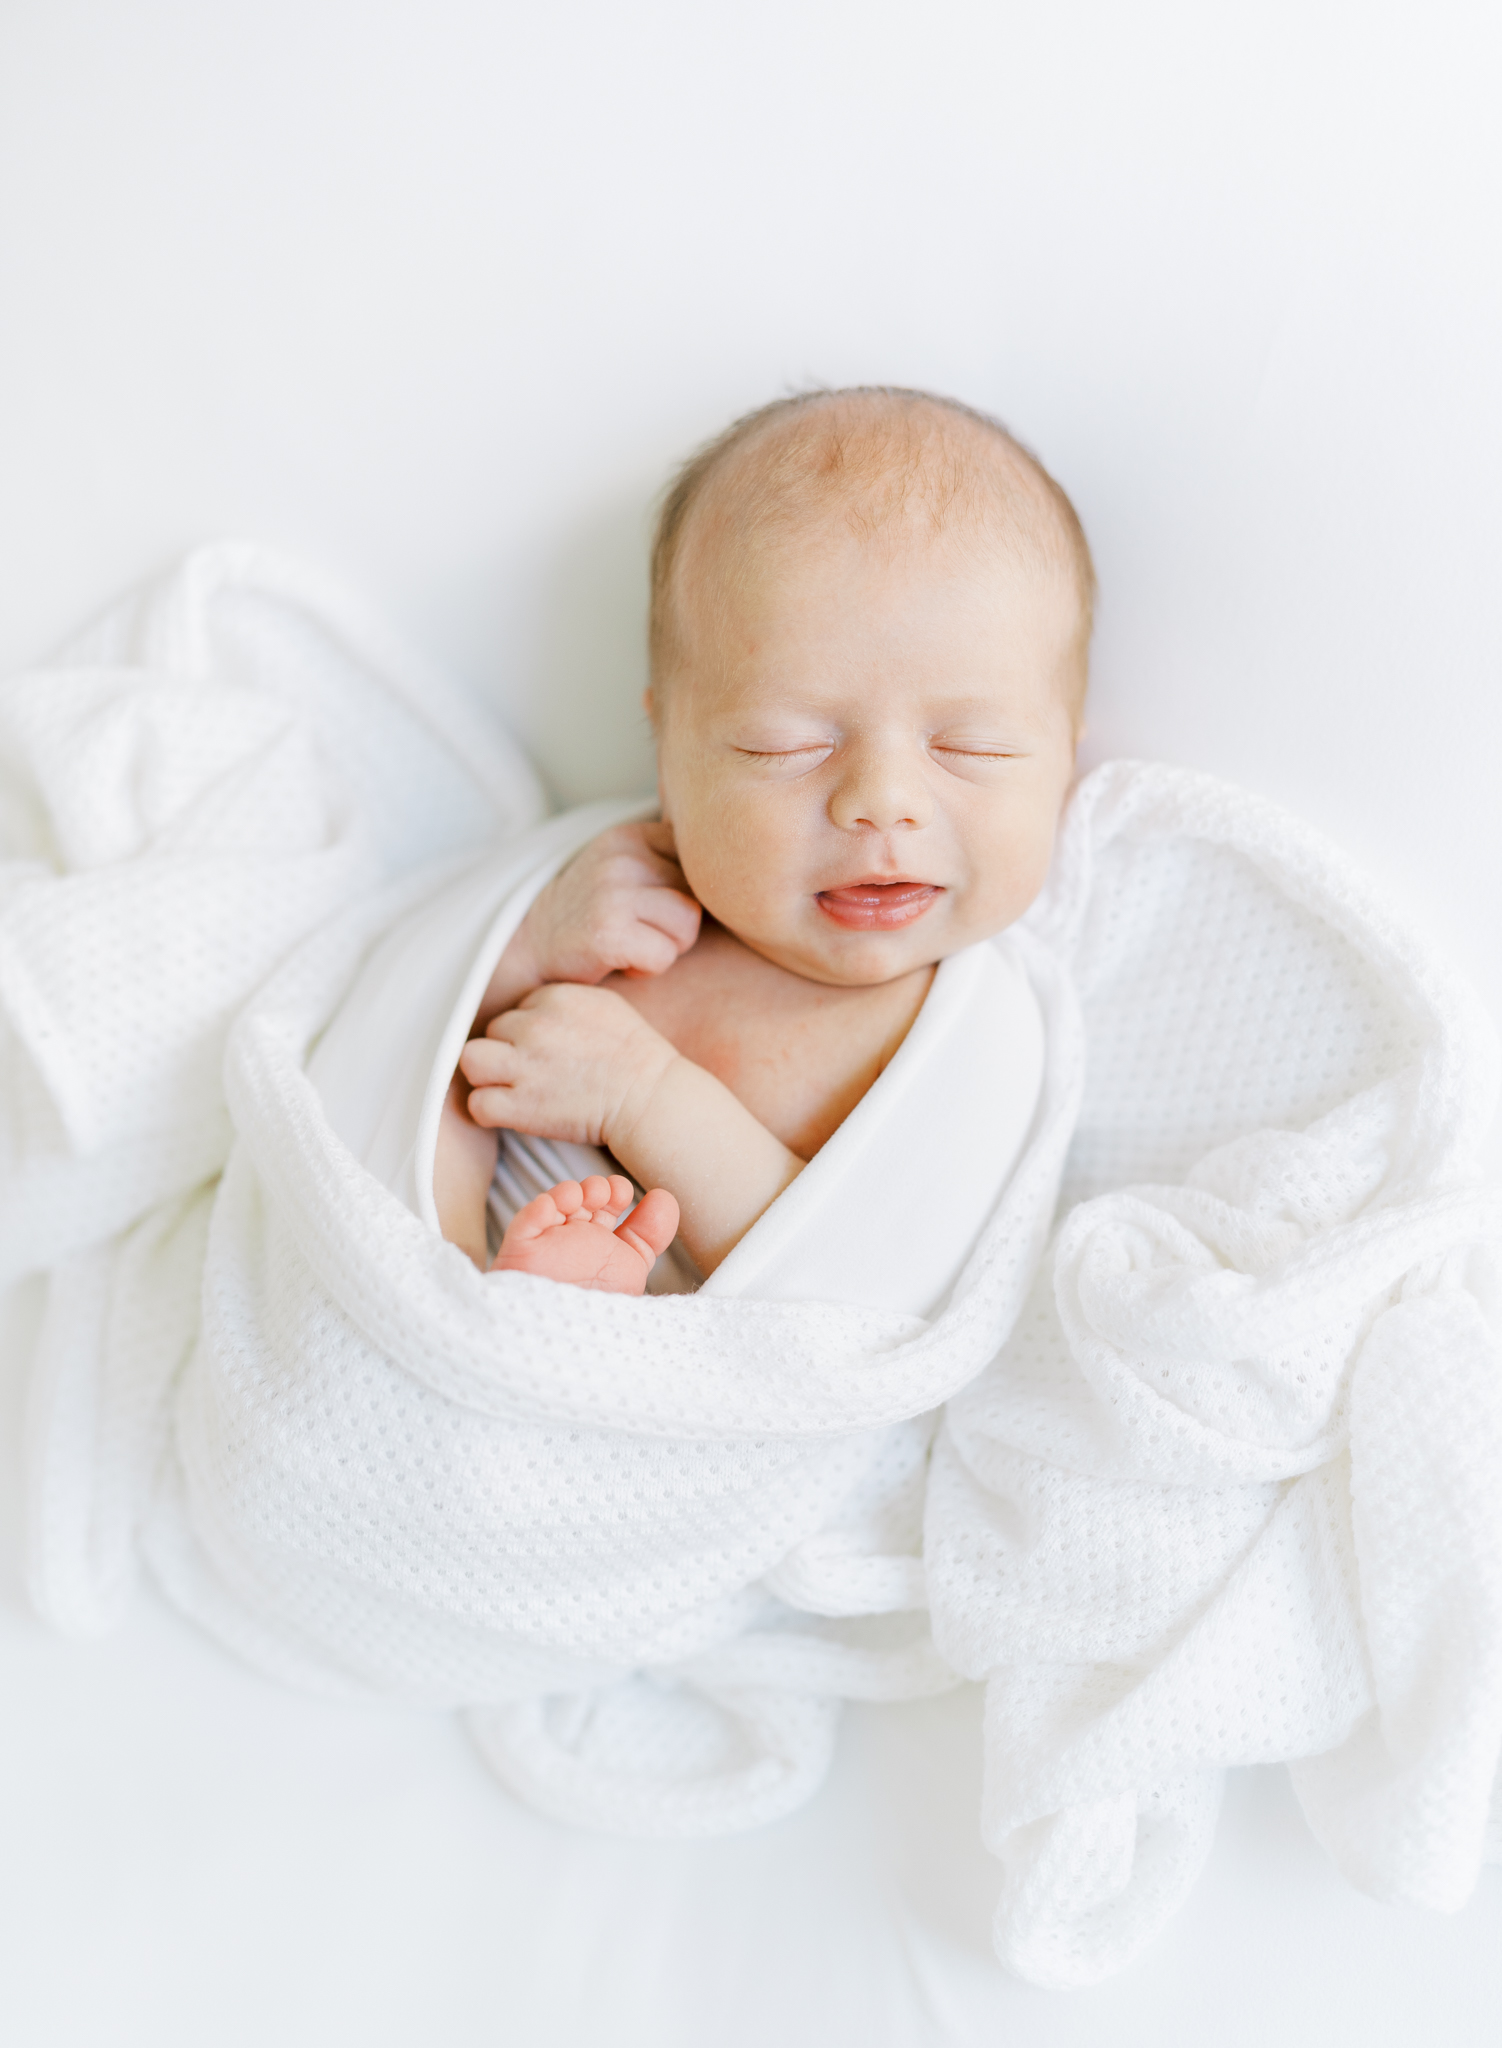 Newborn boy snuggled up in all white for photoshoot.